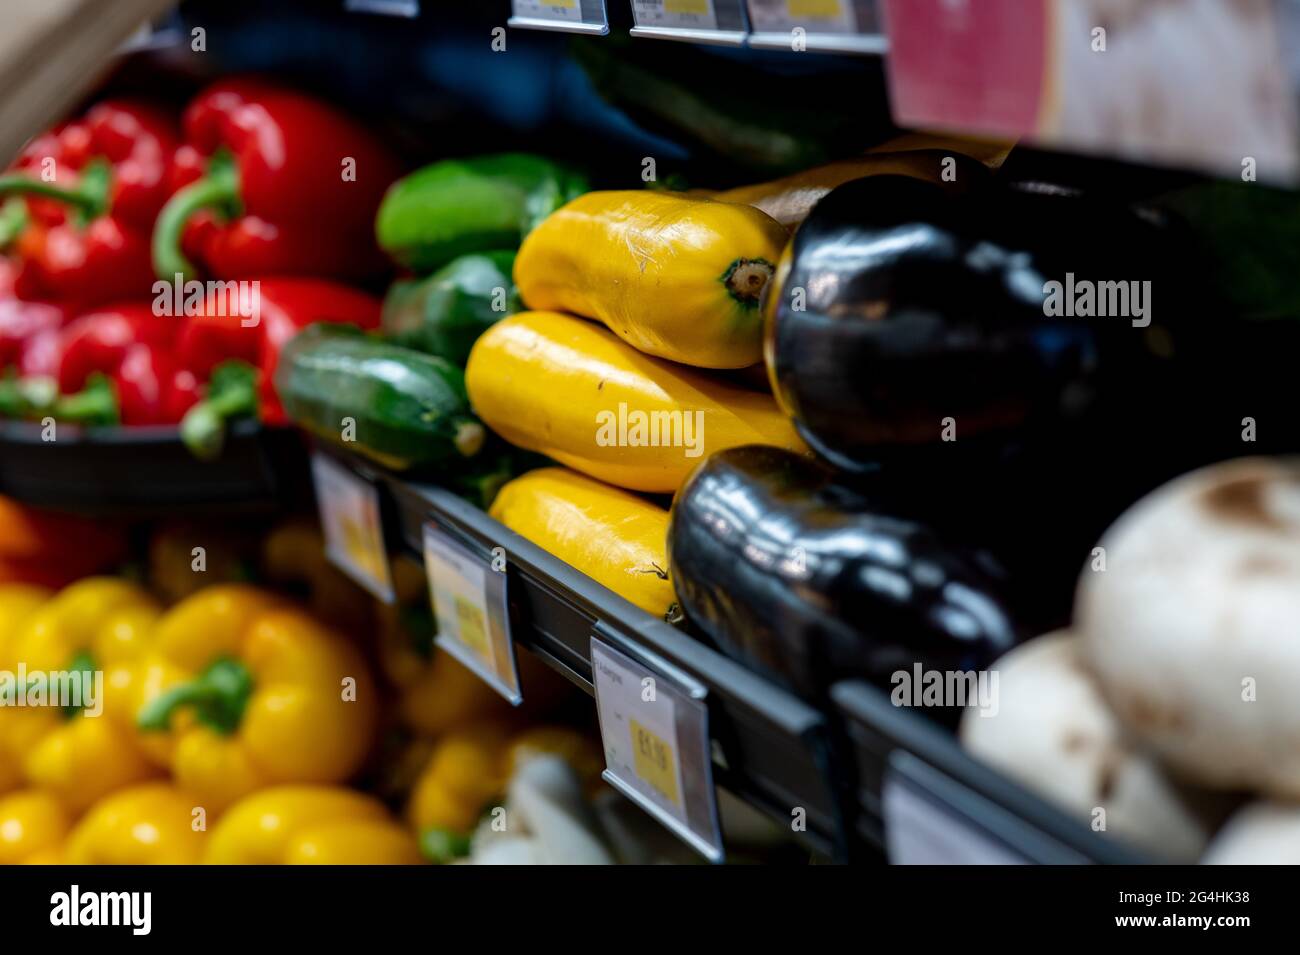 Aubergine or eggplants on sale at a local supermarket. Stock Photo